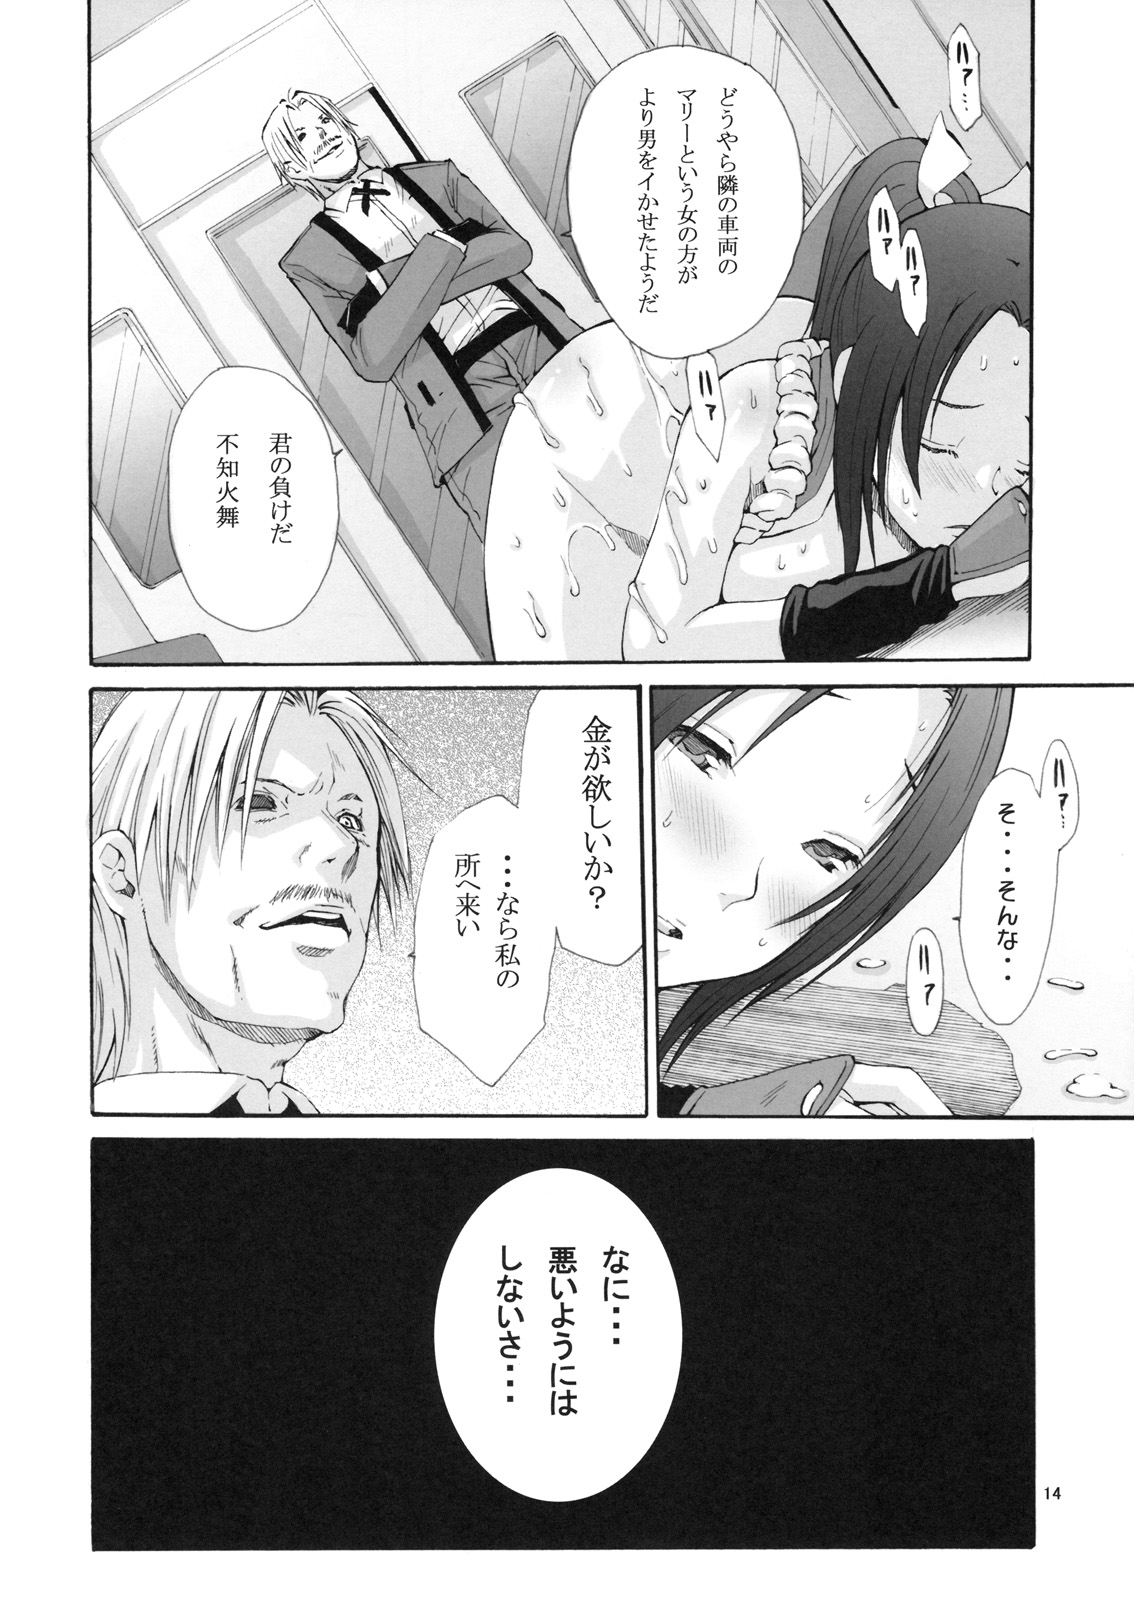 [3g (Junkie)] DOF Mai (King of Fighters) page 13 full